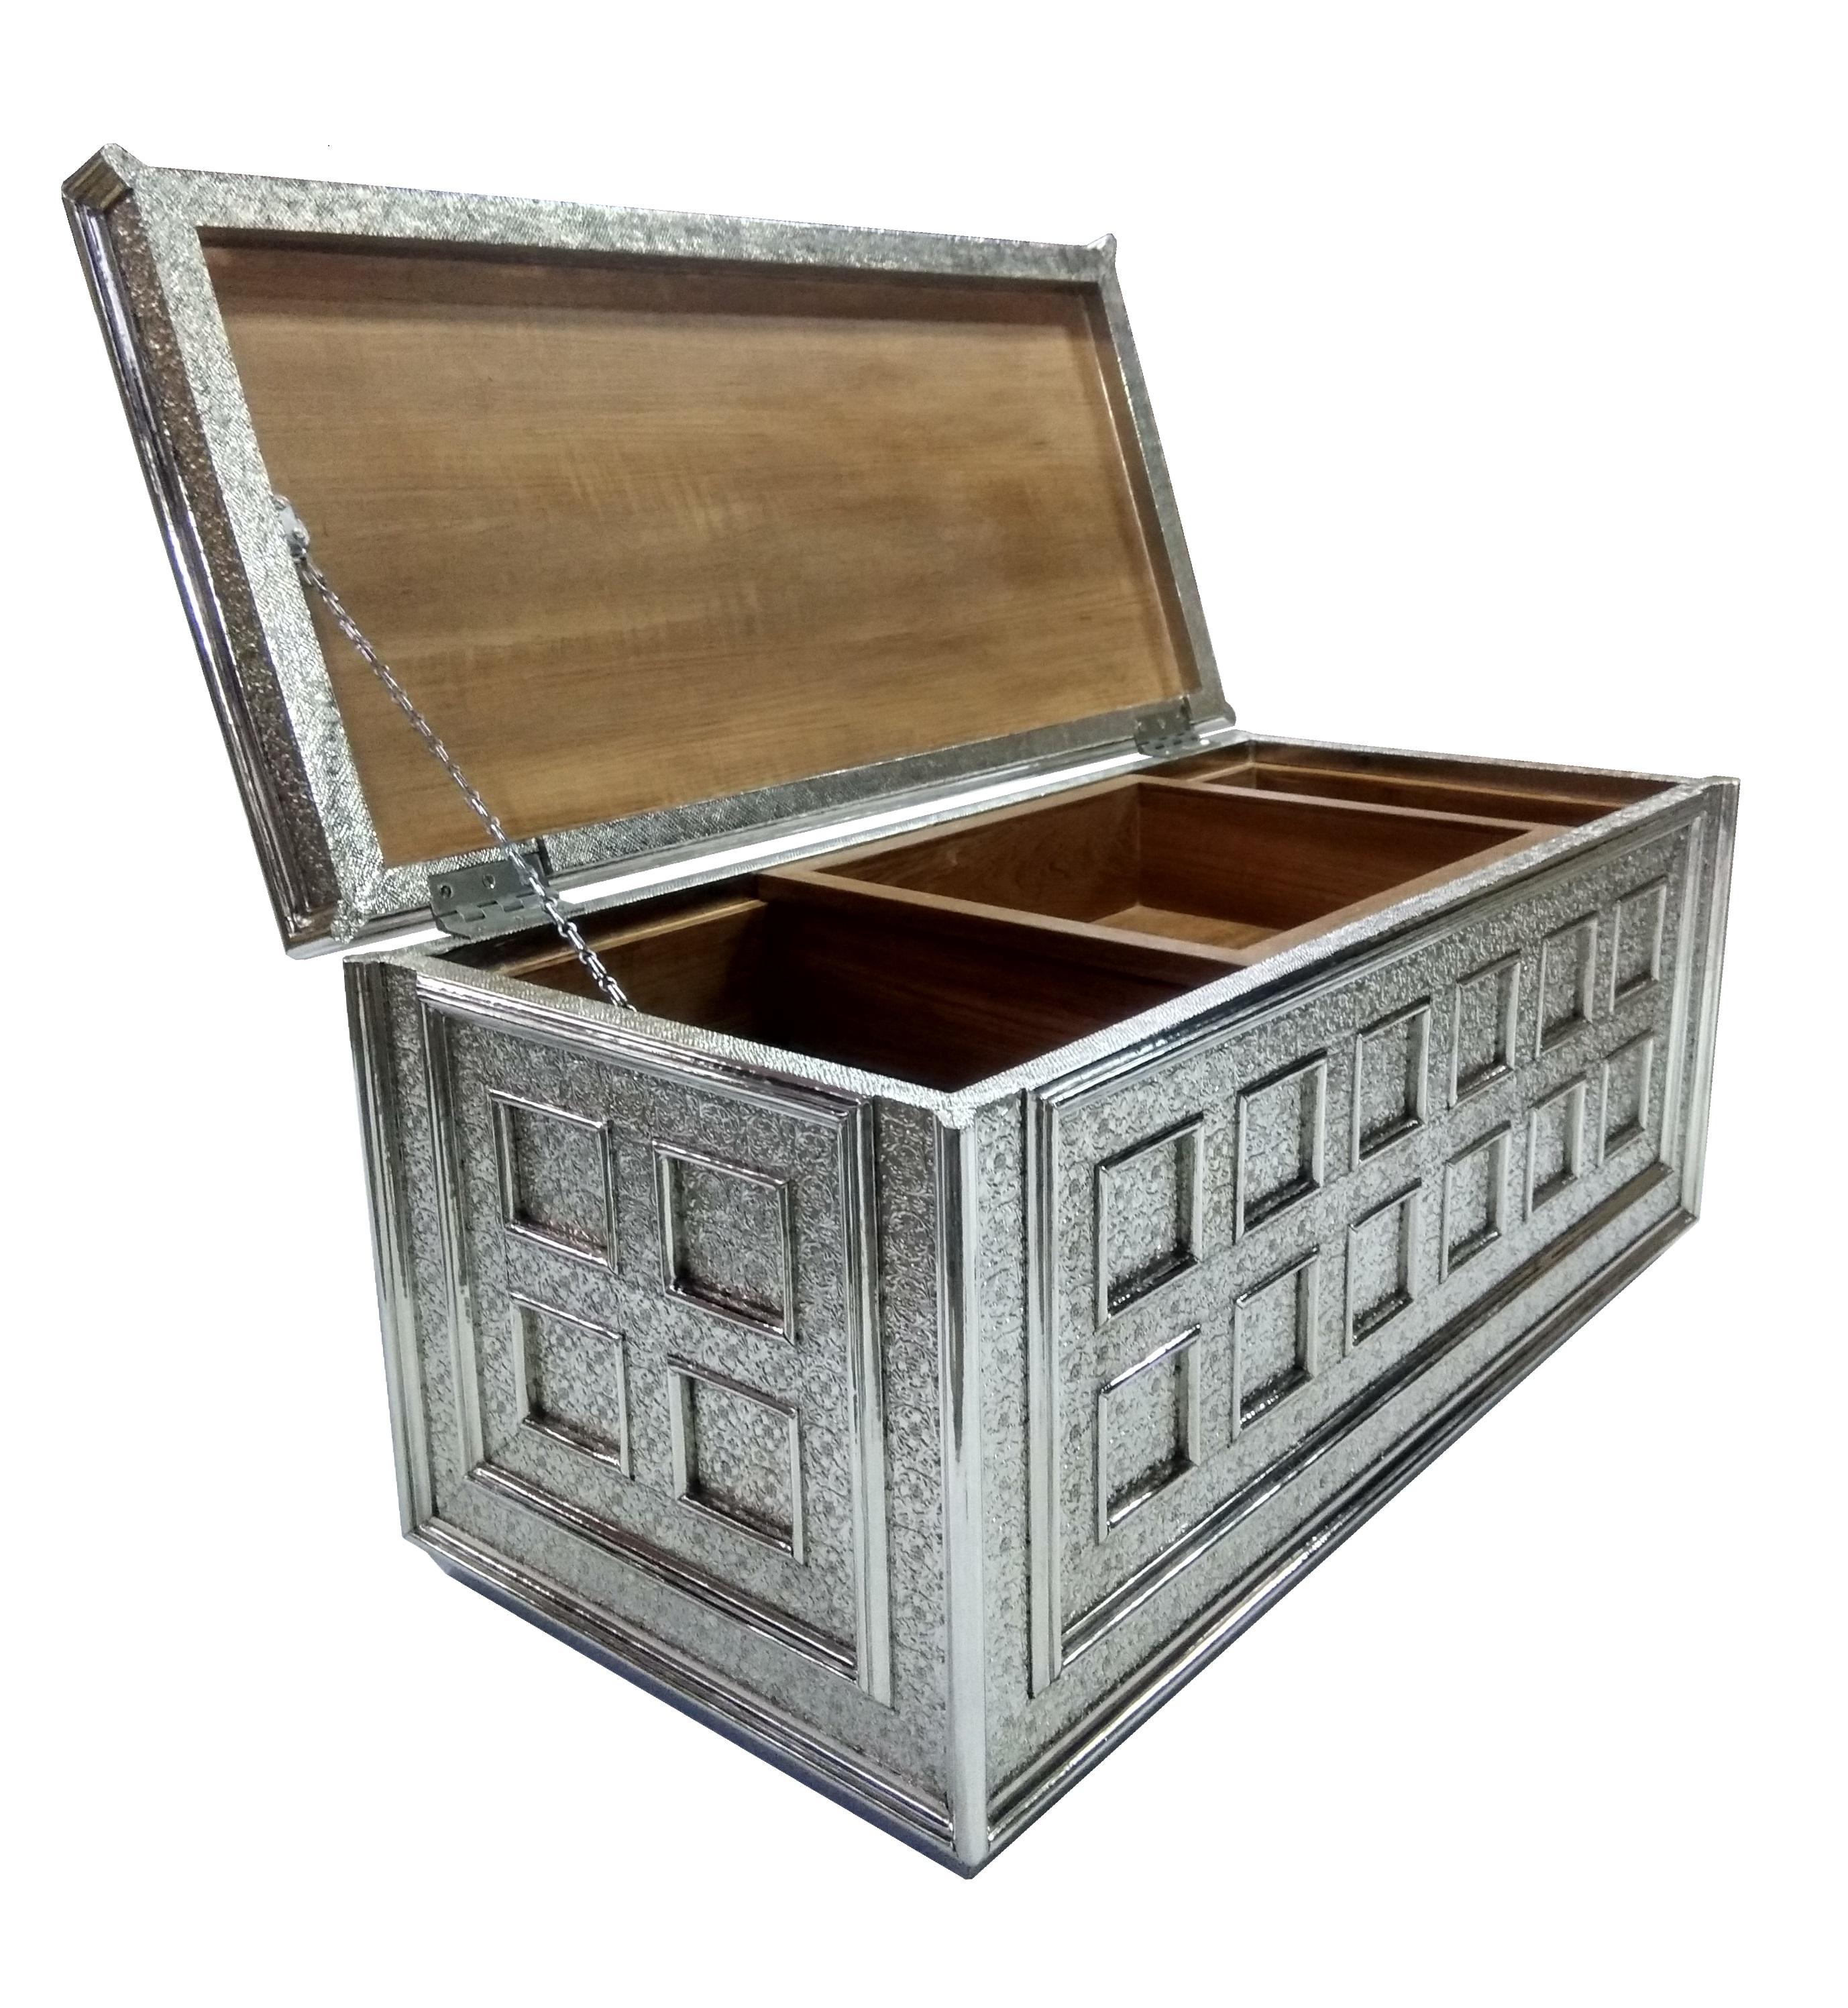 Inspired by the classic coffered, hand-tooled metal-clad furniture of the opulent Mughal period. This elegant furniture is hand made from solid pieces of teak that are joined into a repeating pattern of panels enclosed by raised moldings. Pattern